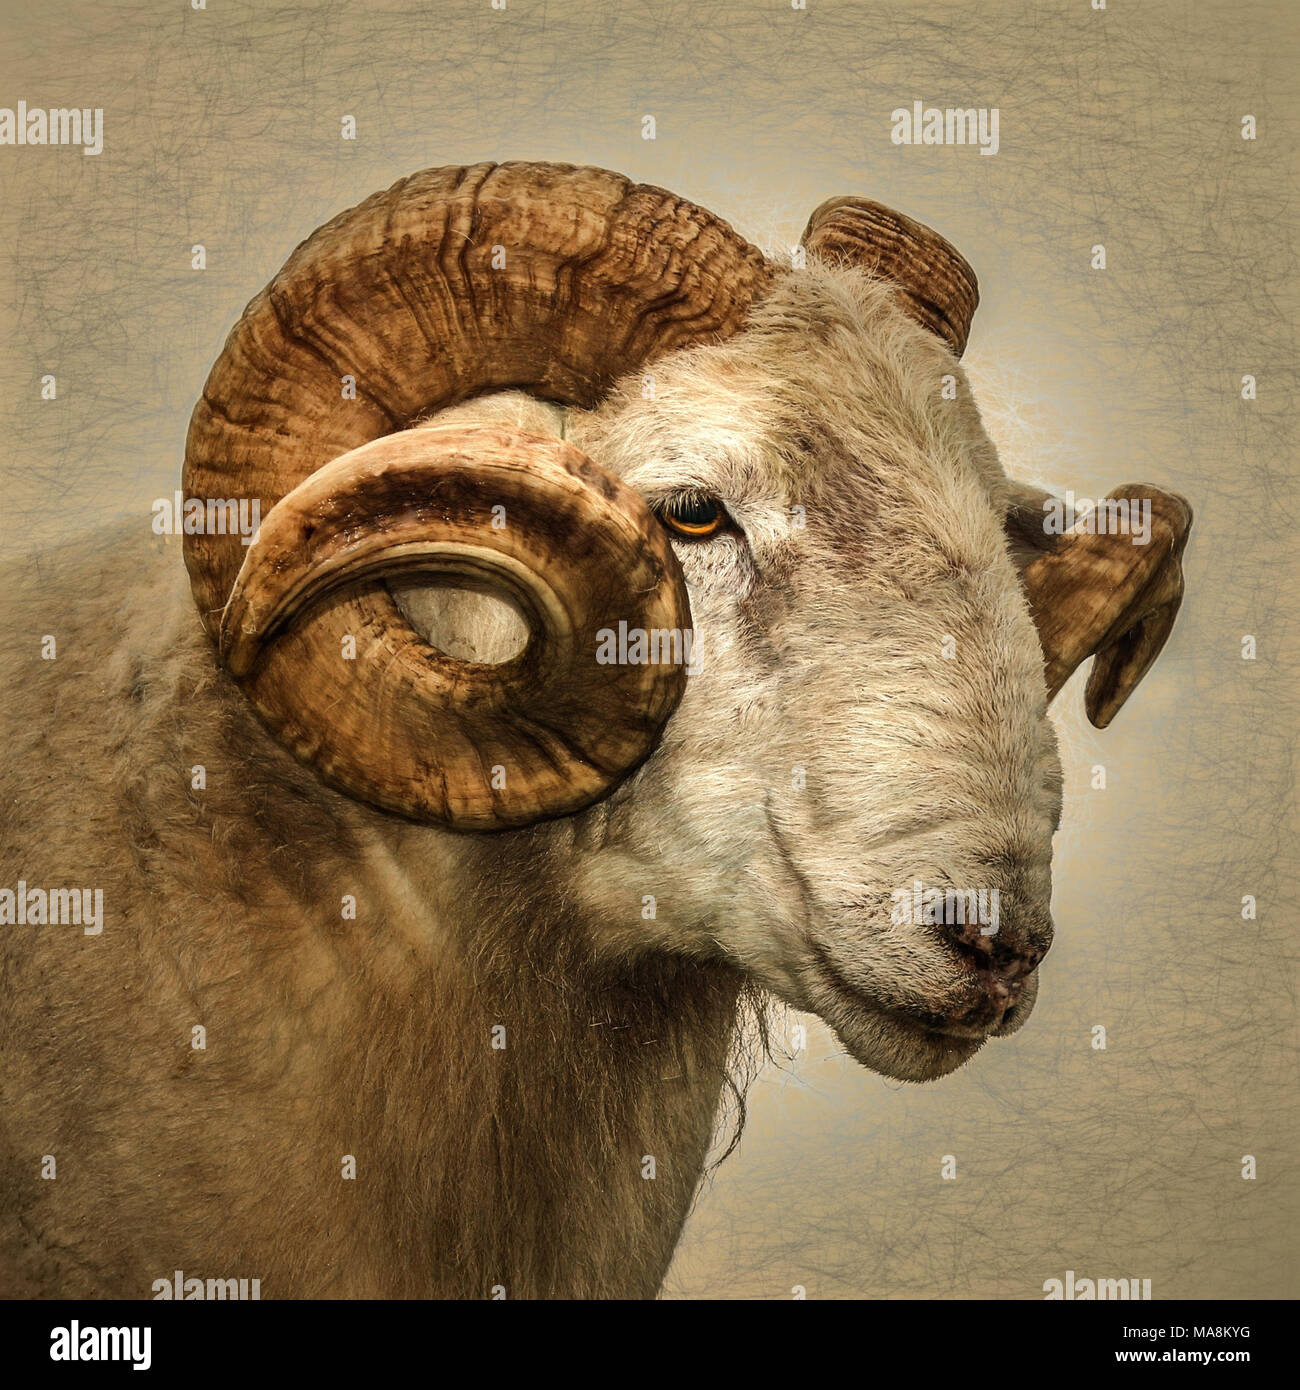 Close up of a Ram with large horns Stock Photo - Alamy